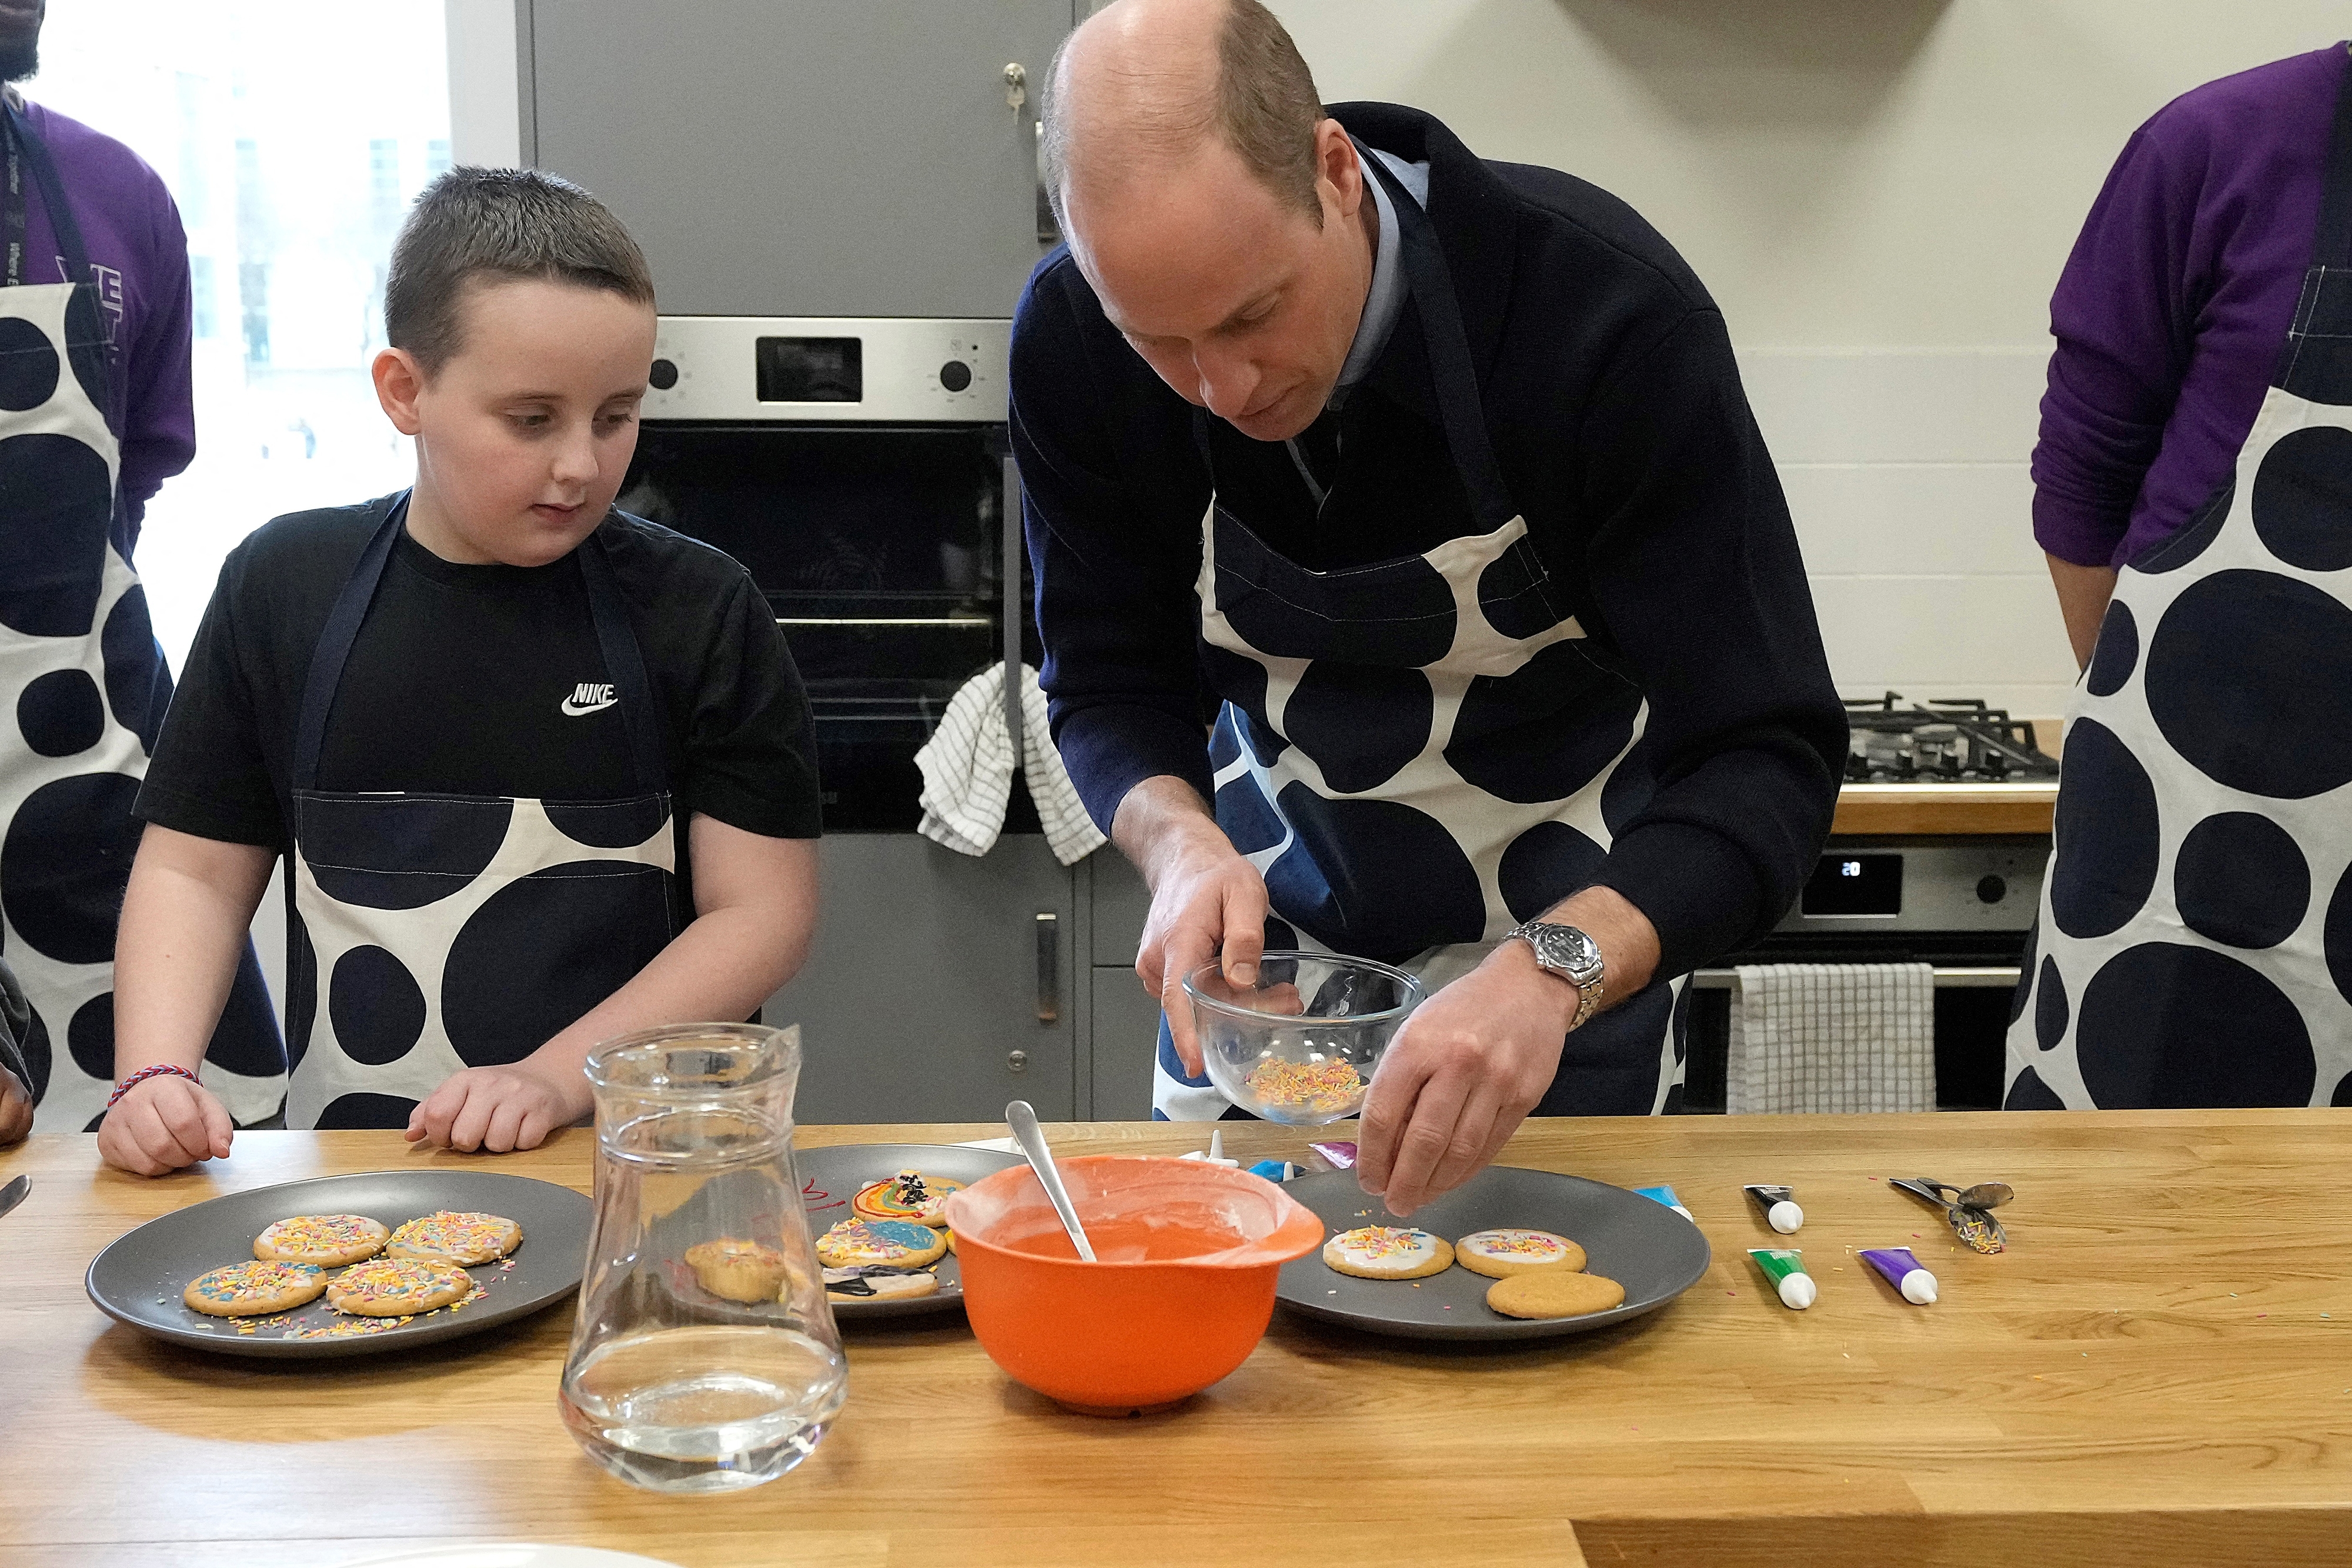 Prince William, apron-clad, cooks with a young boy in a kitchen setting